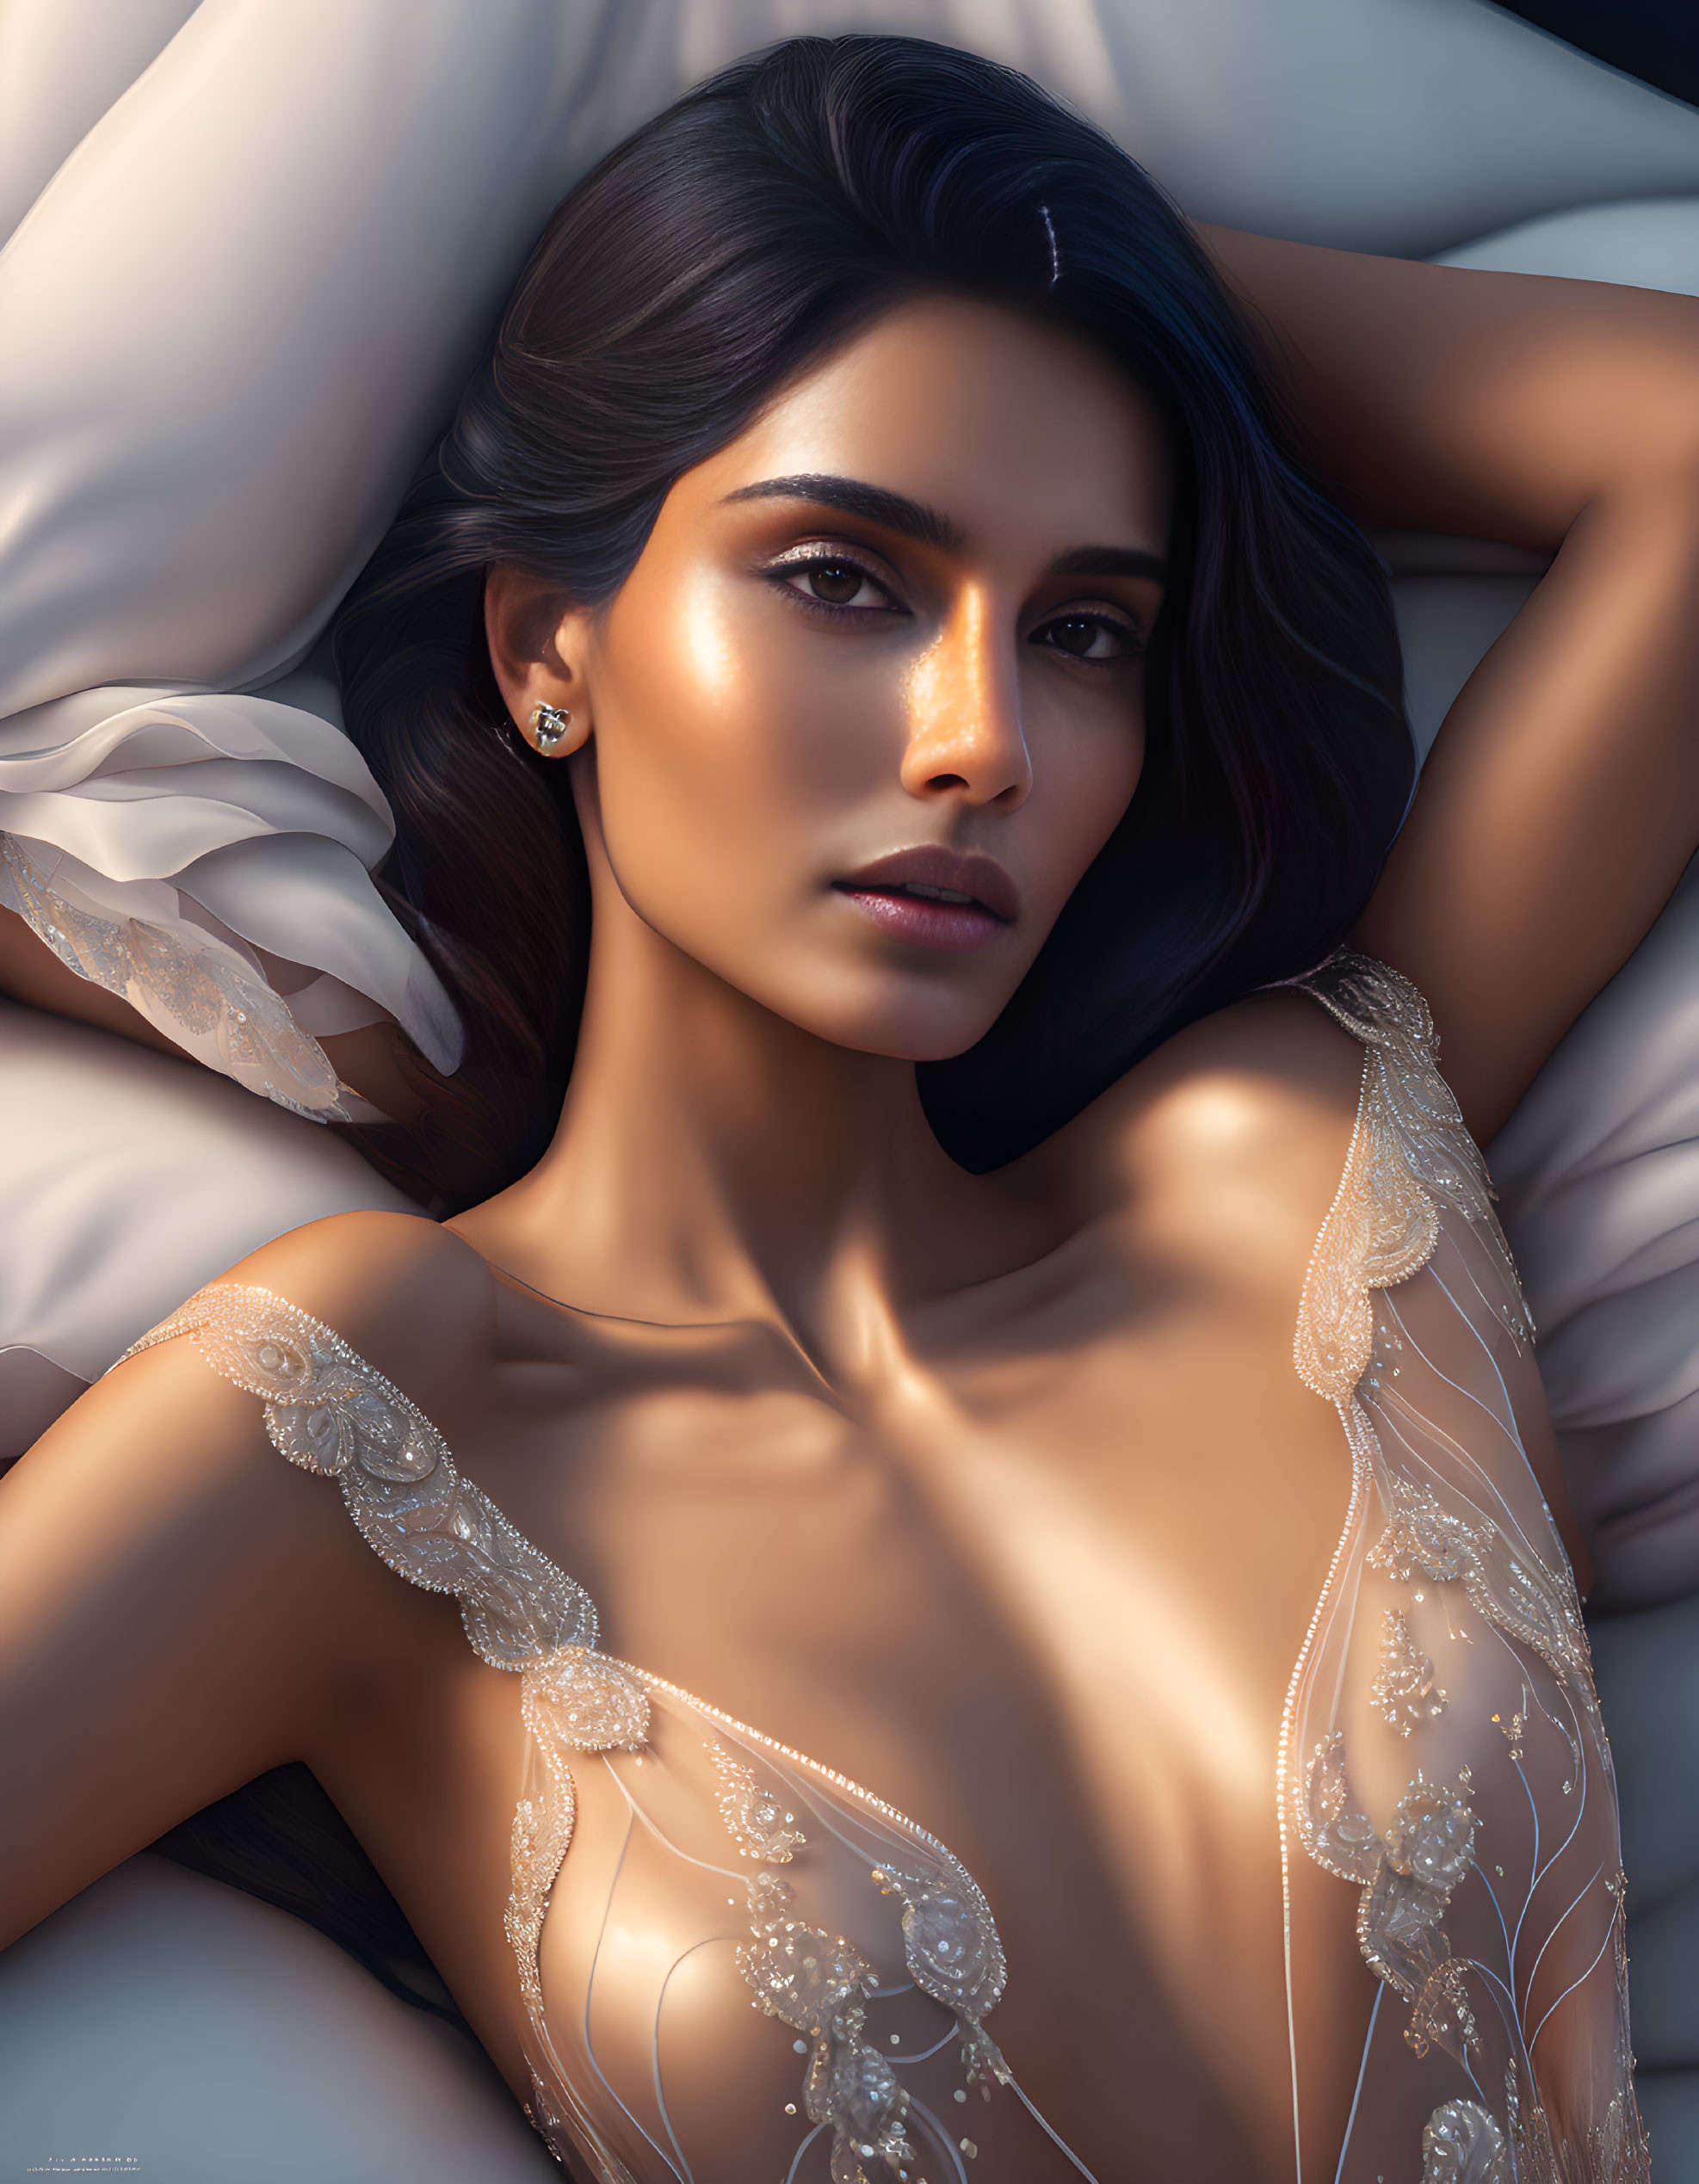 Dark-haired woman in sheer embroidered dress lying on white pillows